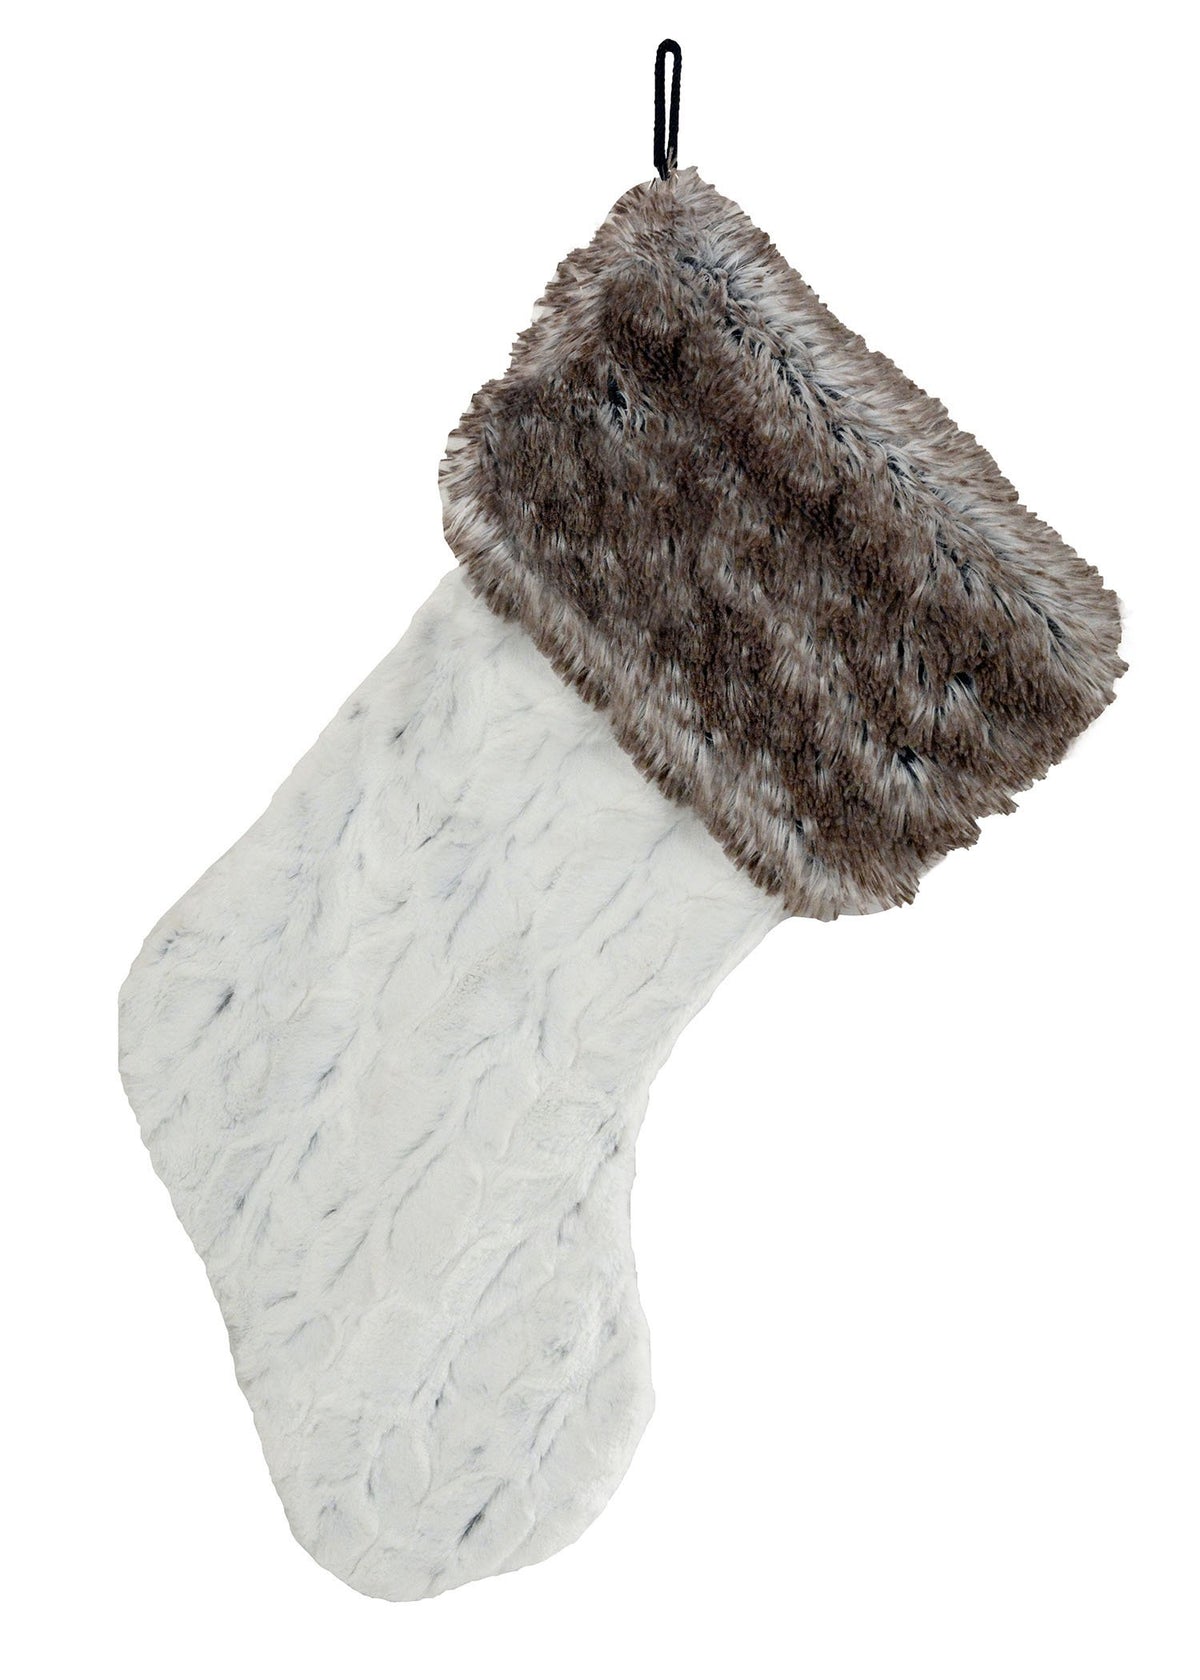 Holiday Stocking - Arctic Fox Faux Fur Cuff with Winter Frost Faux Fur - Handmade in Seattle, WA by Pandemonium Millinery